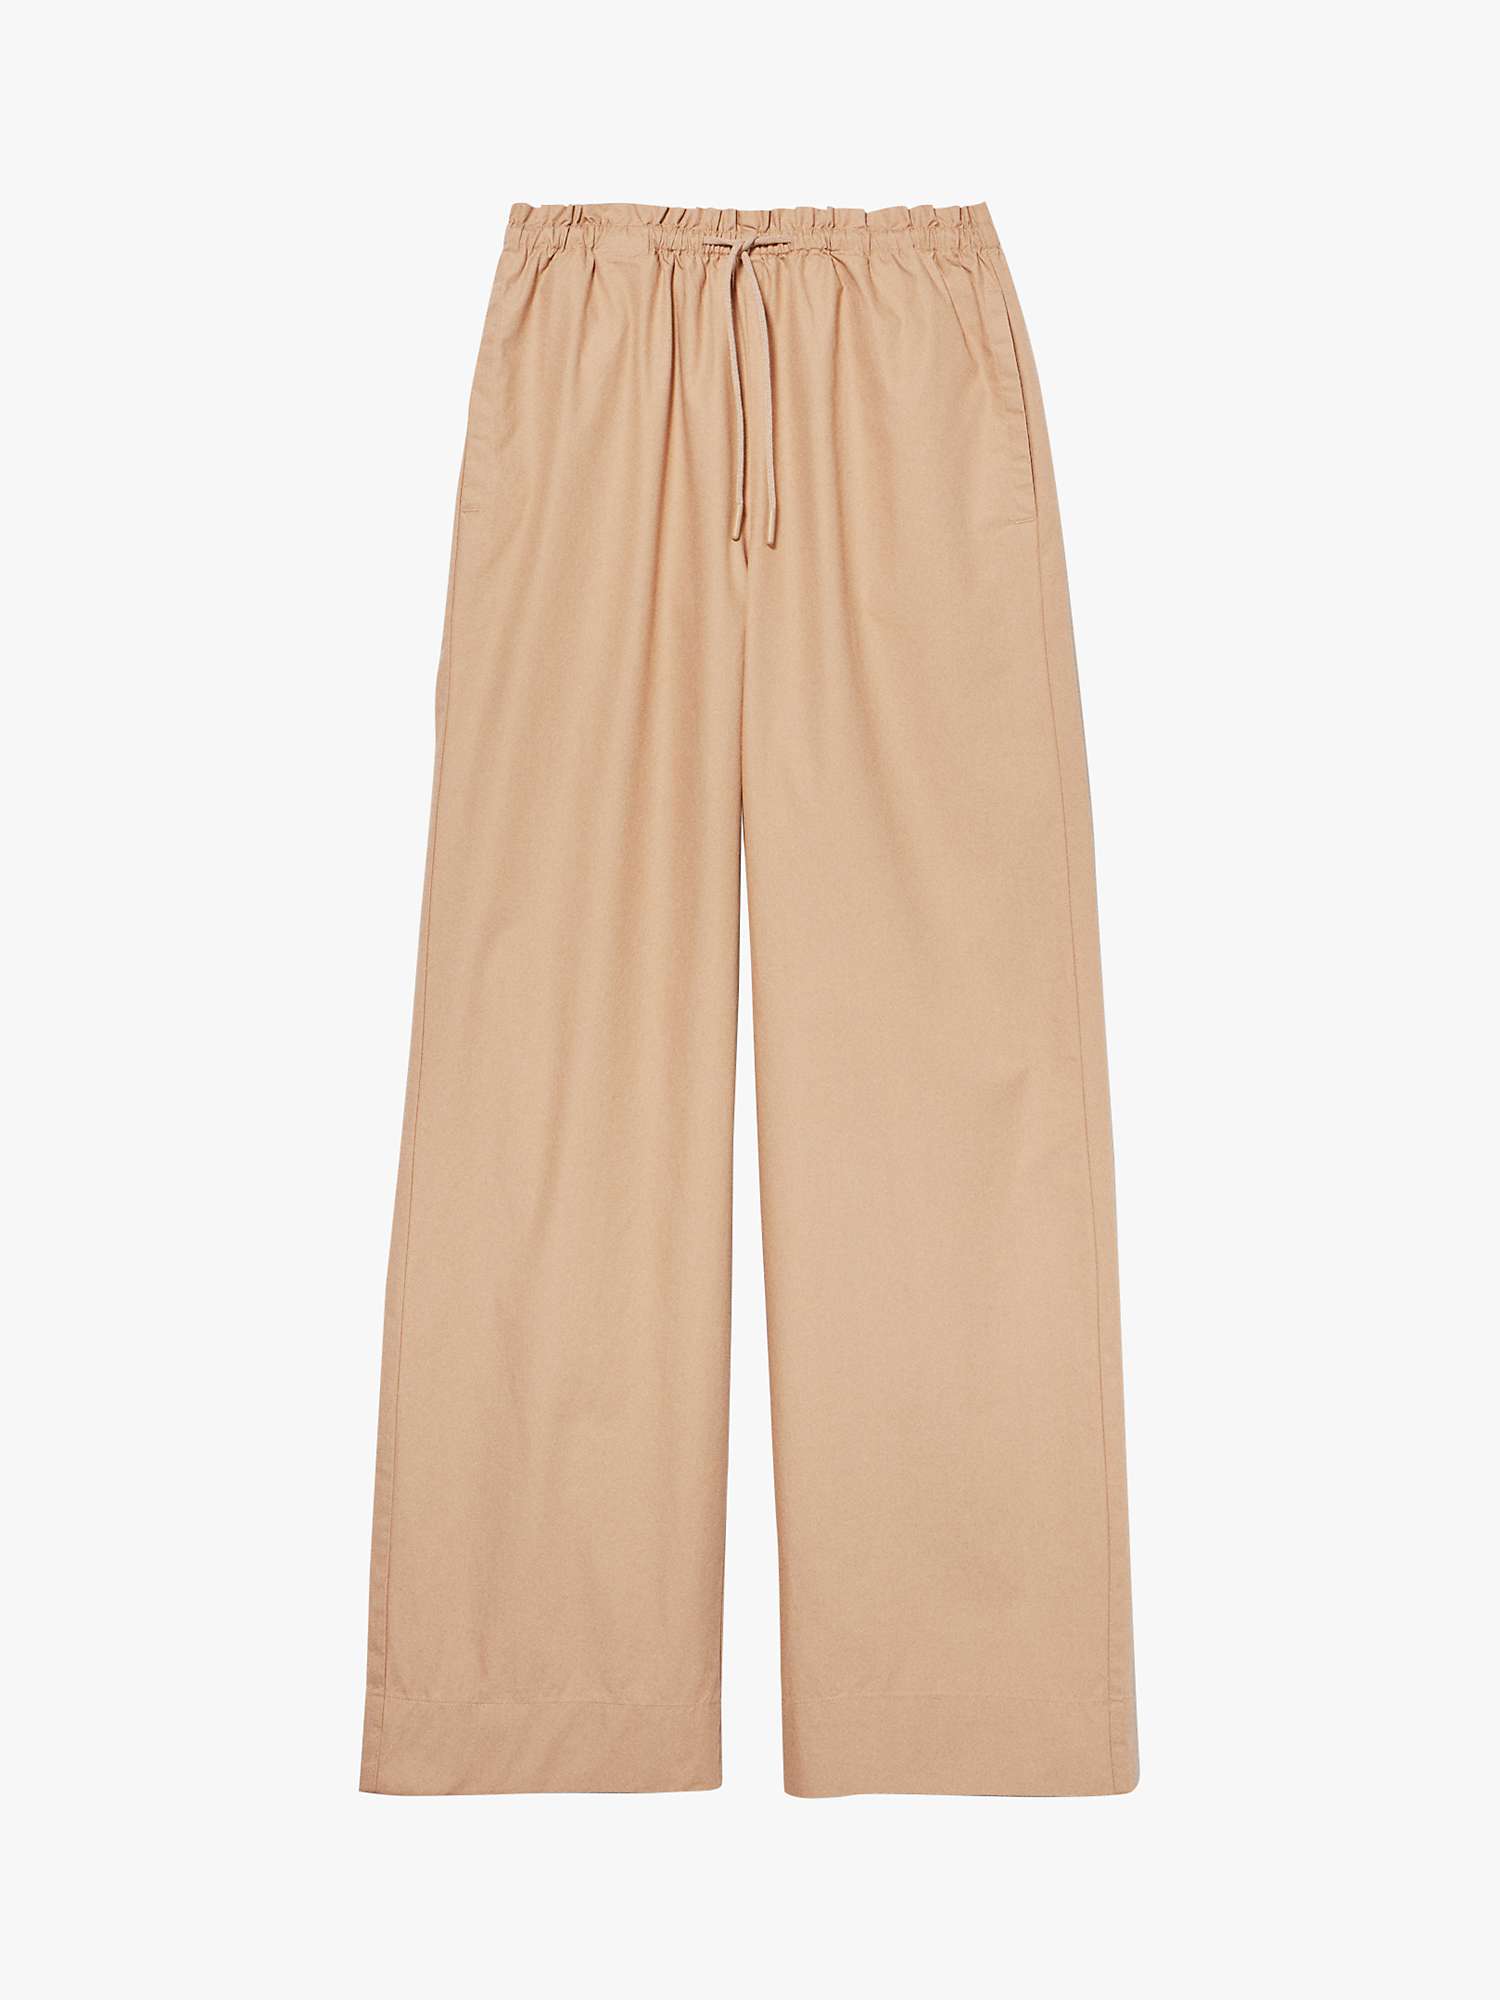 Buy SISLEY Cotton Poplin Flared Trousers Online at johnlewis.com